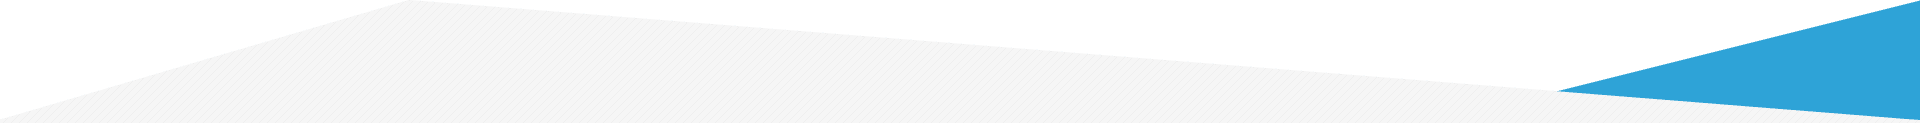 A green and white background with lines